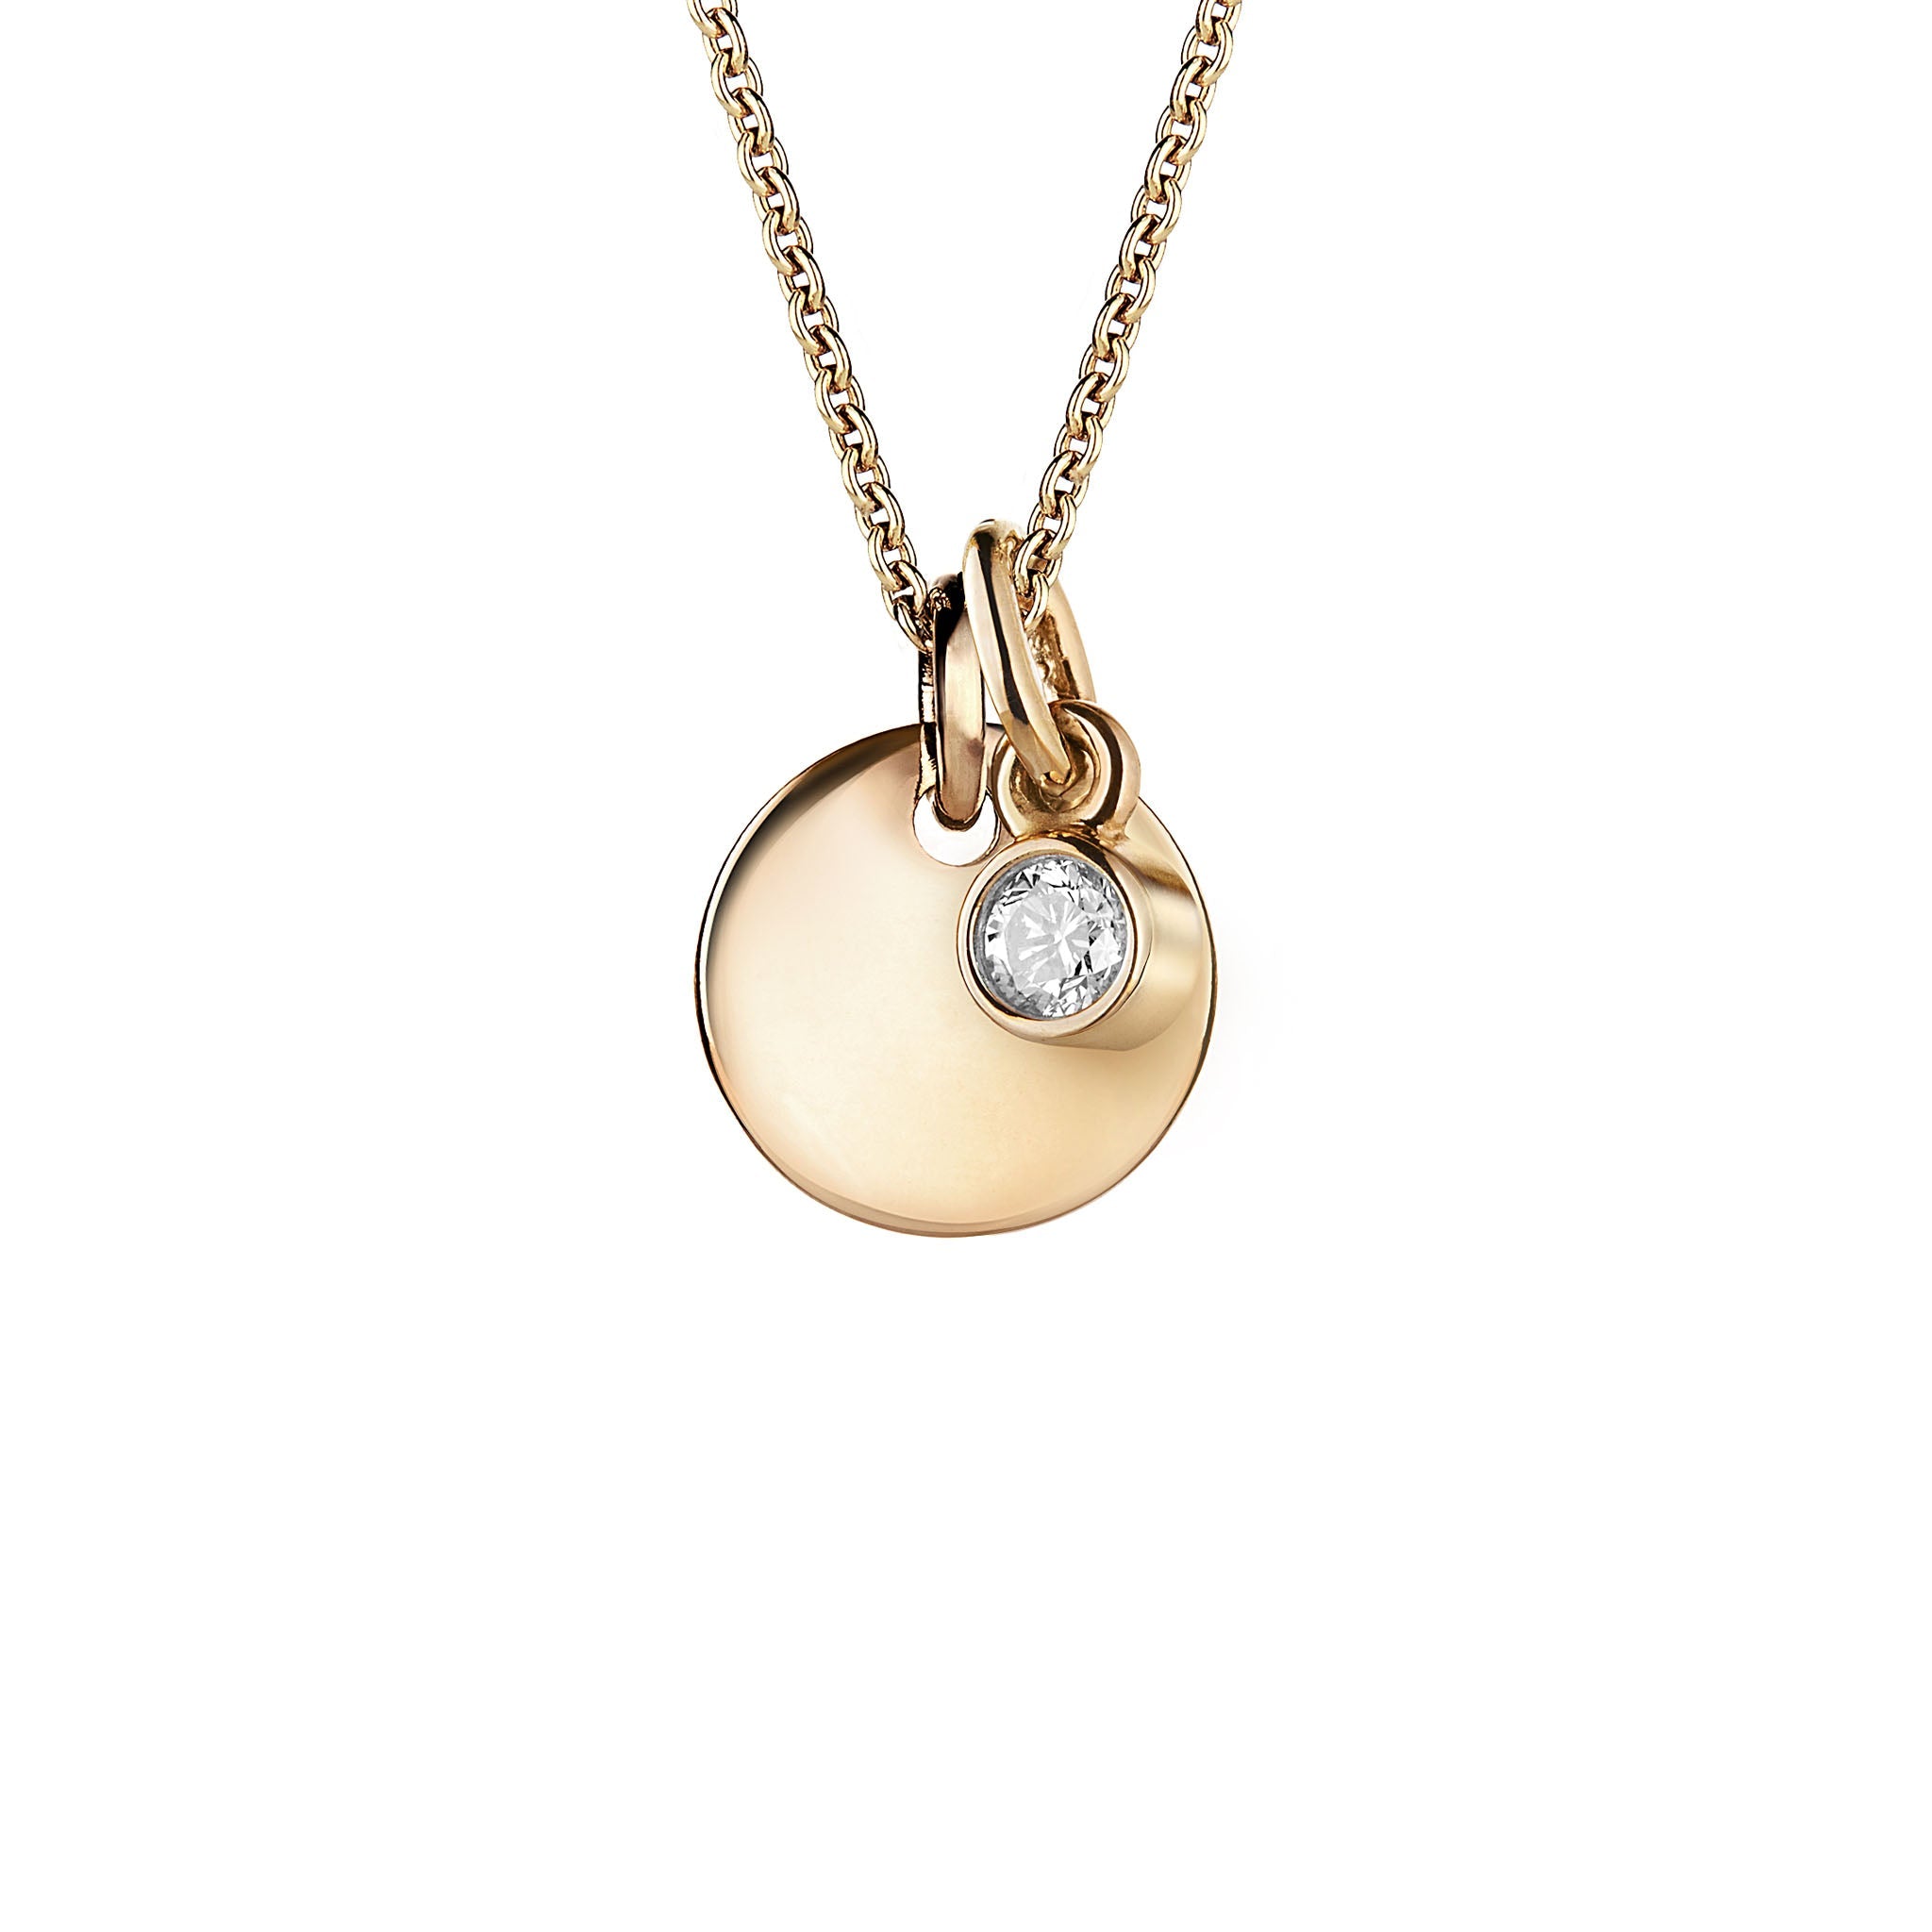 Smooth disk and diamond necklace